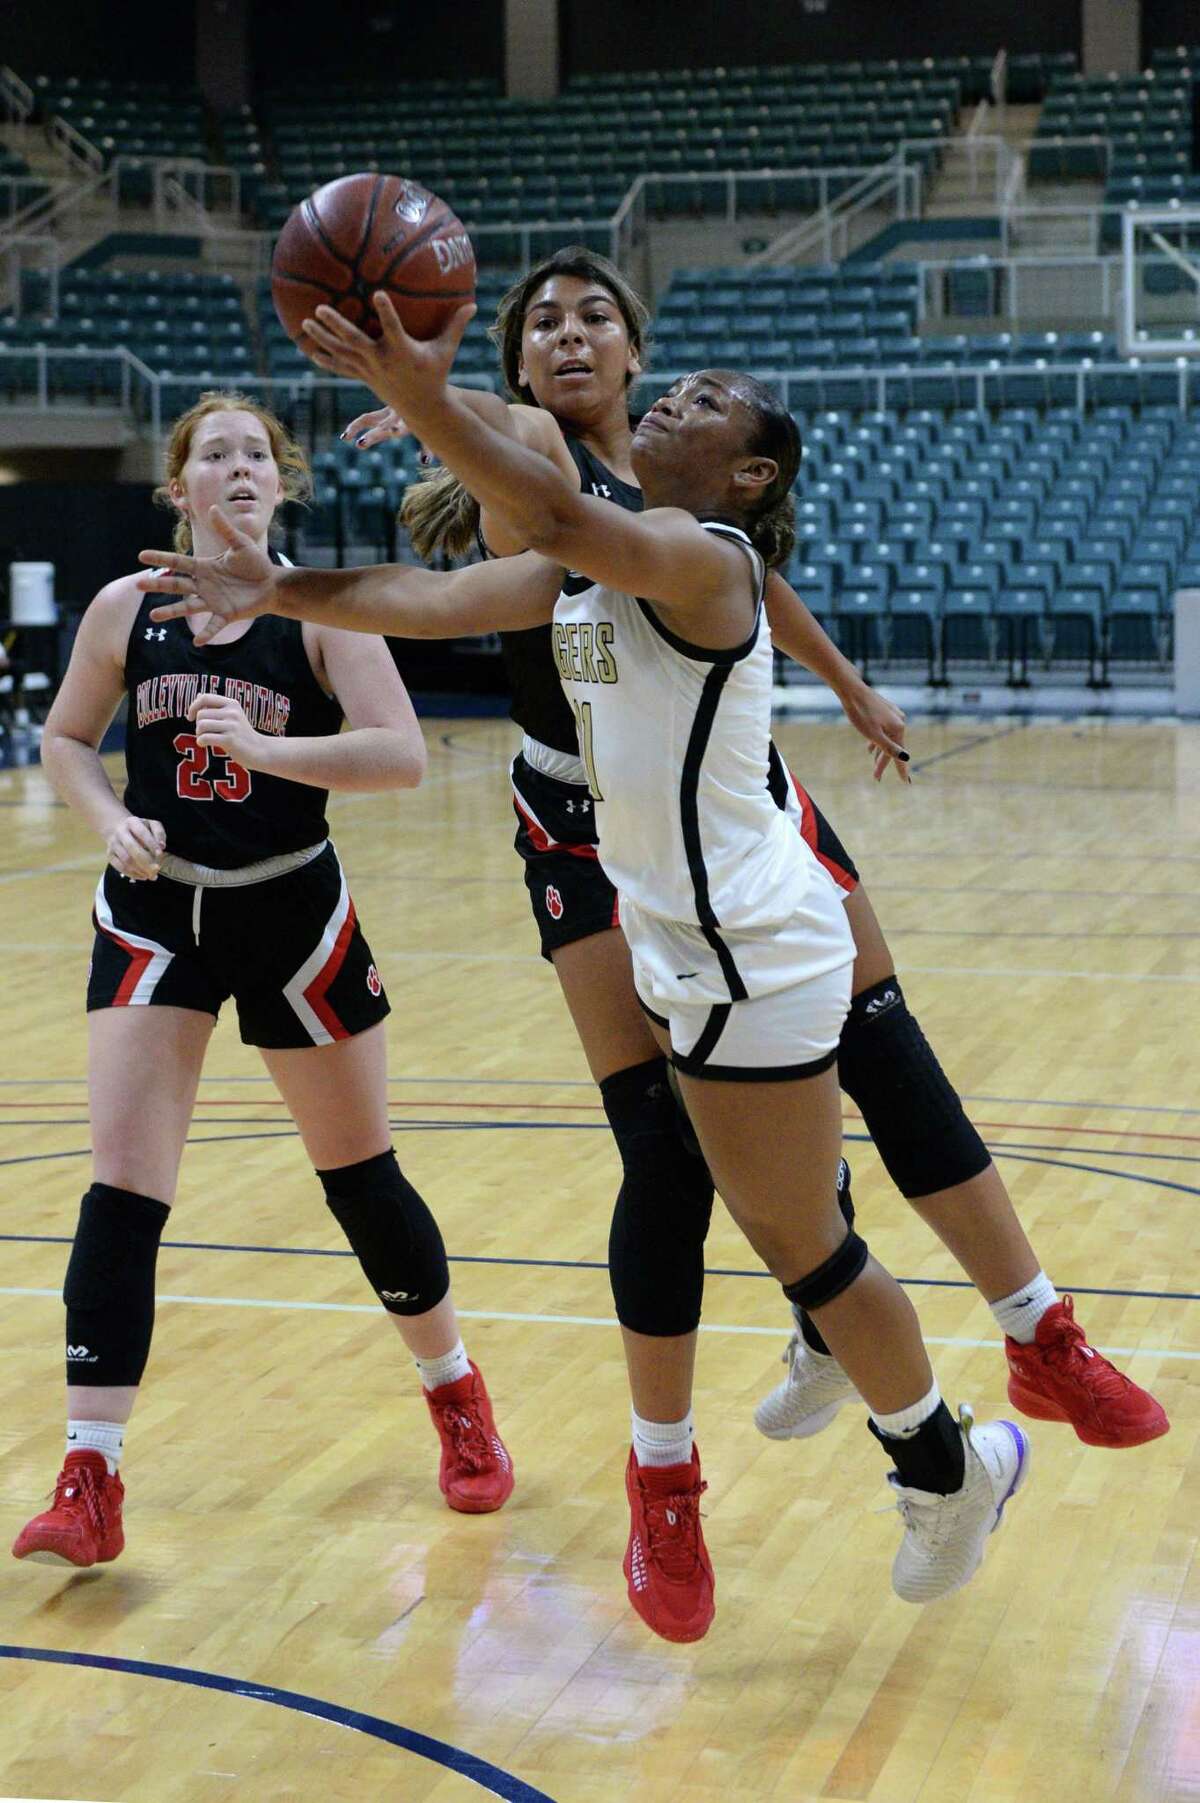 Kennedy Powell (11) of Conroe drives to the basket past Gabrielle Gipson (22) of Colleyville Heritage during the first half of a game between the Conroe Tigers and the Colleyville Heritage Panthers in the Katy ISD Basketball Classic on Friday, December 3, 2021 at the Leonard Merrill Center, Katy, TX.